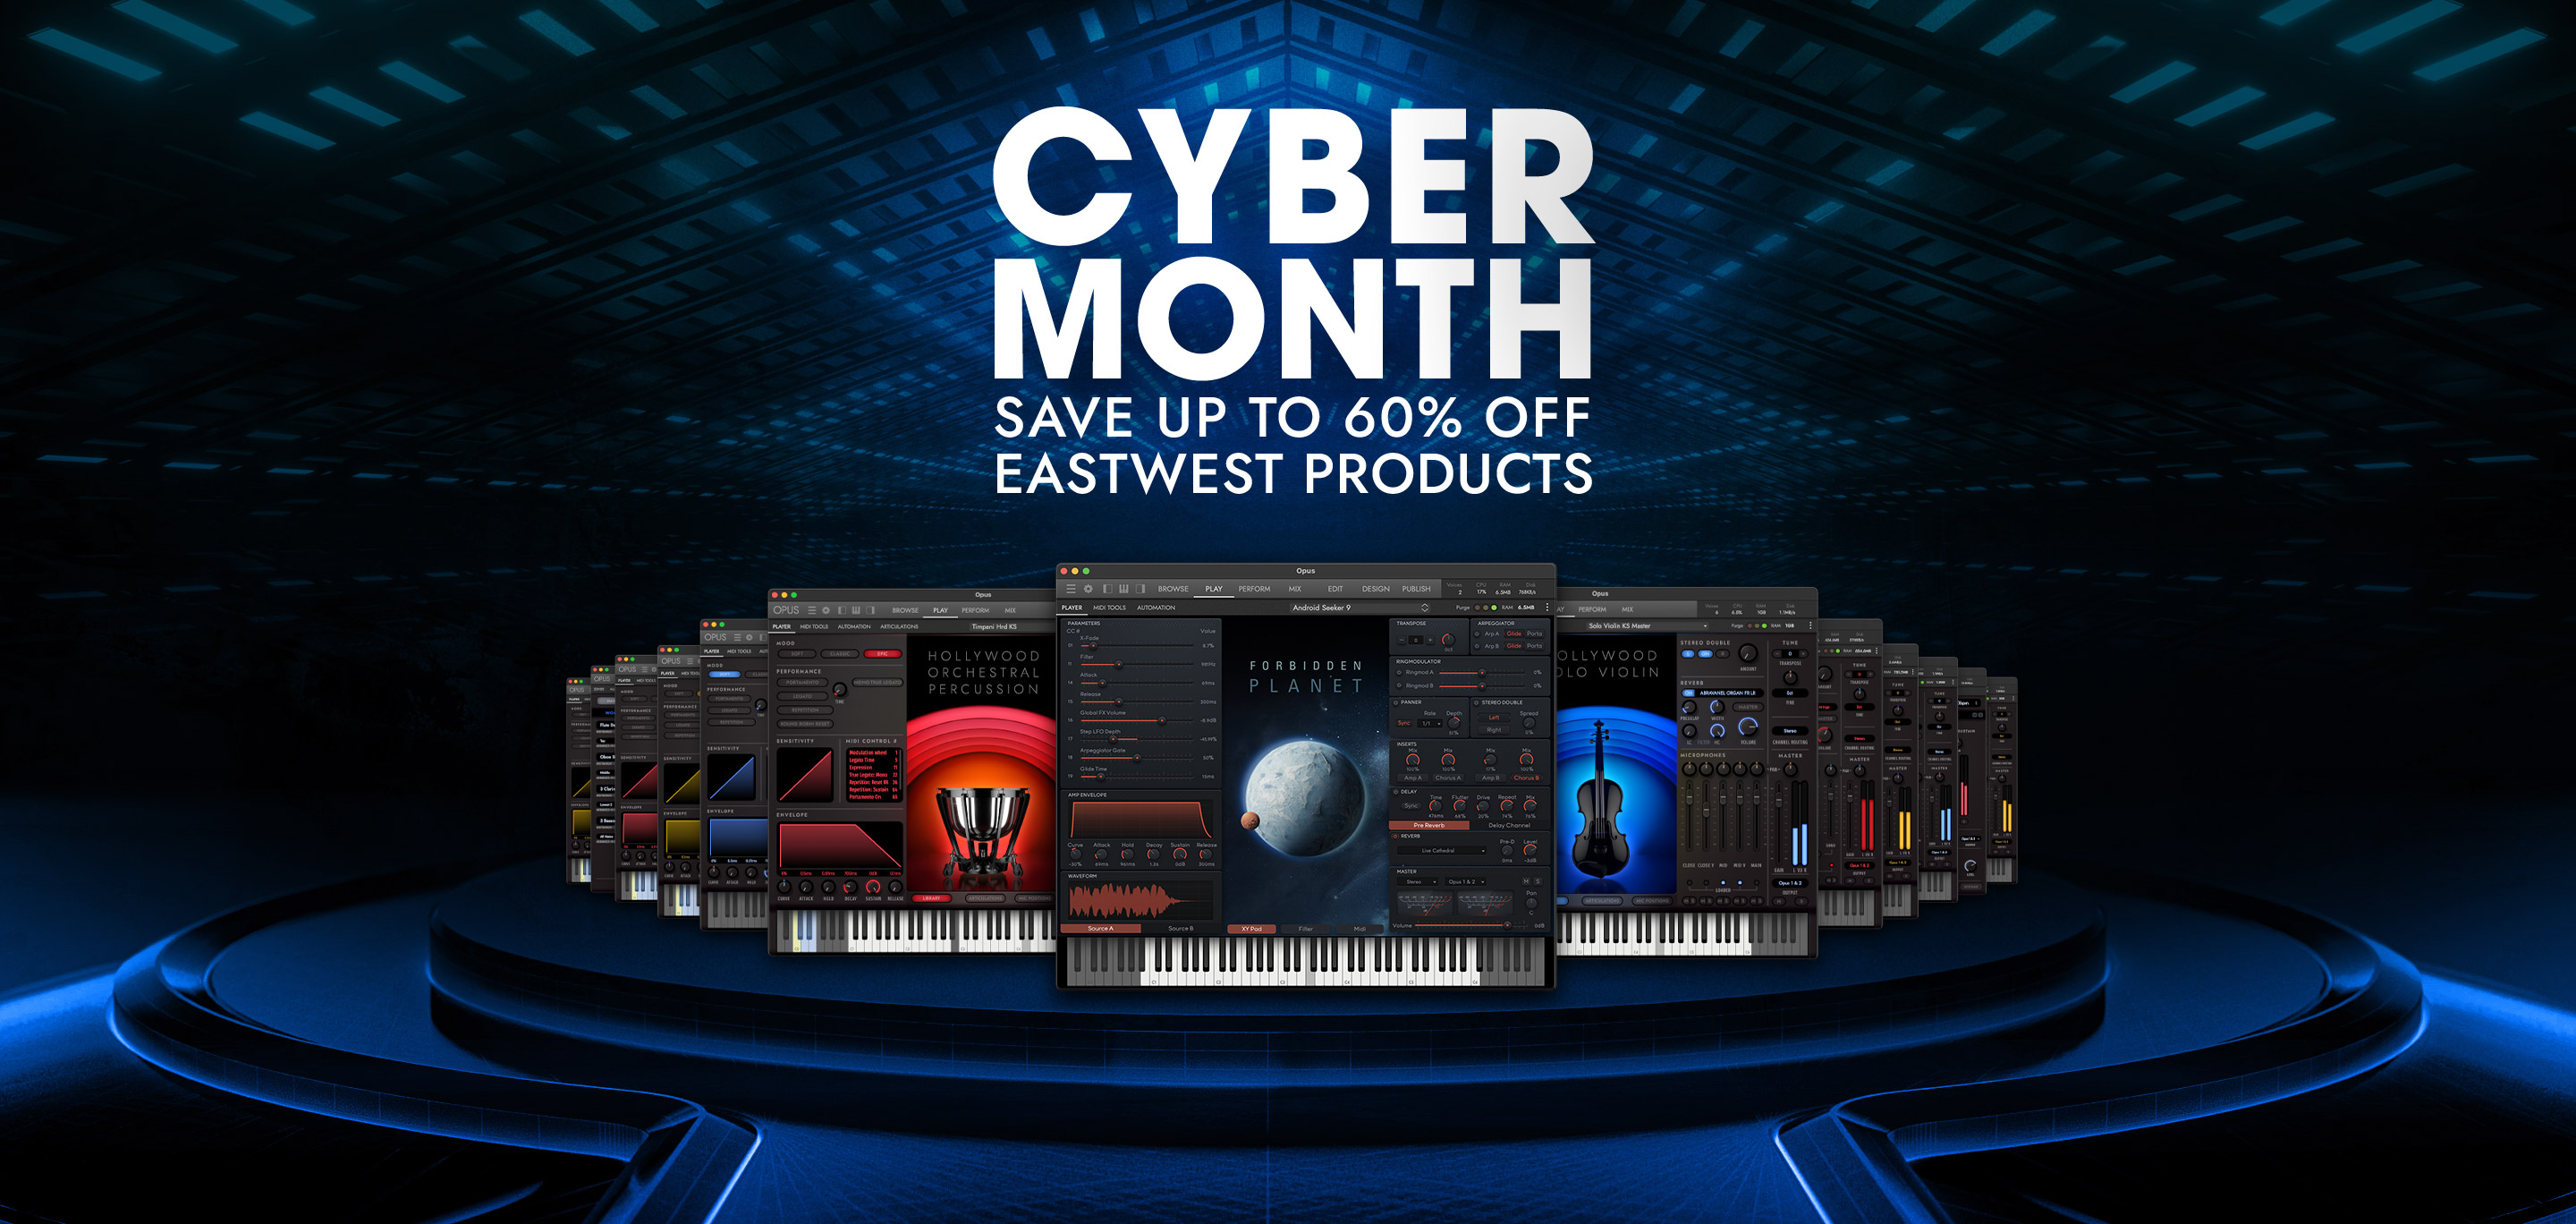 EastWest Cyber Month Sale - Save up to 60% off